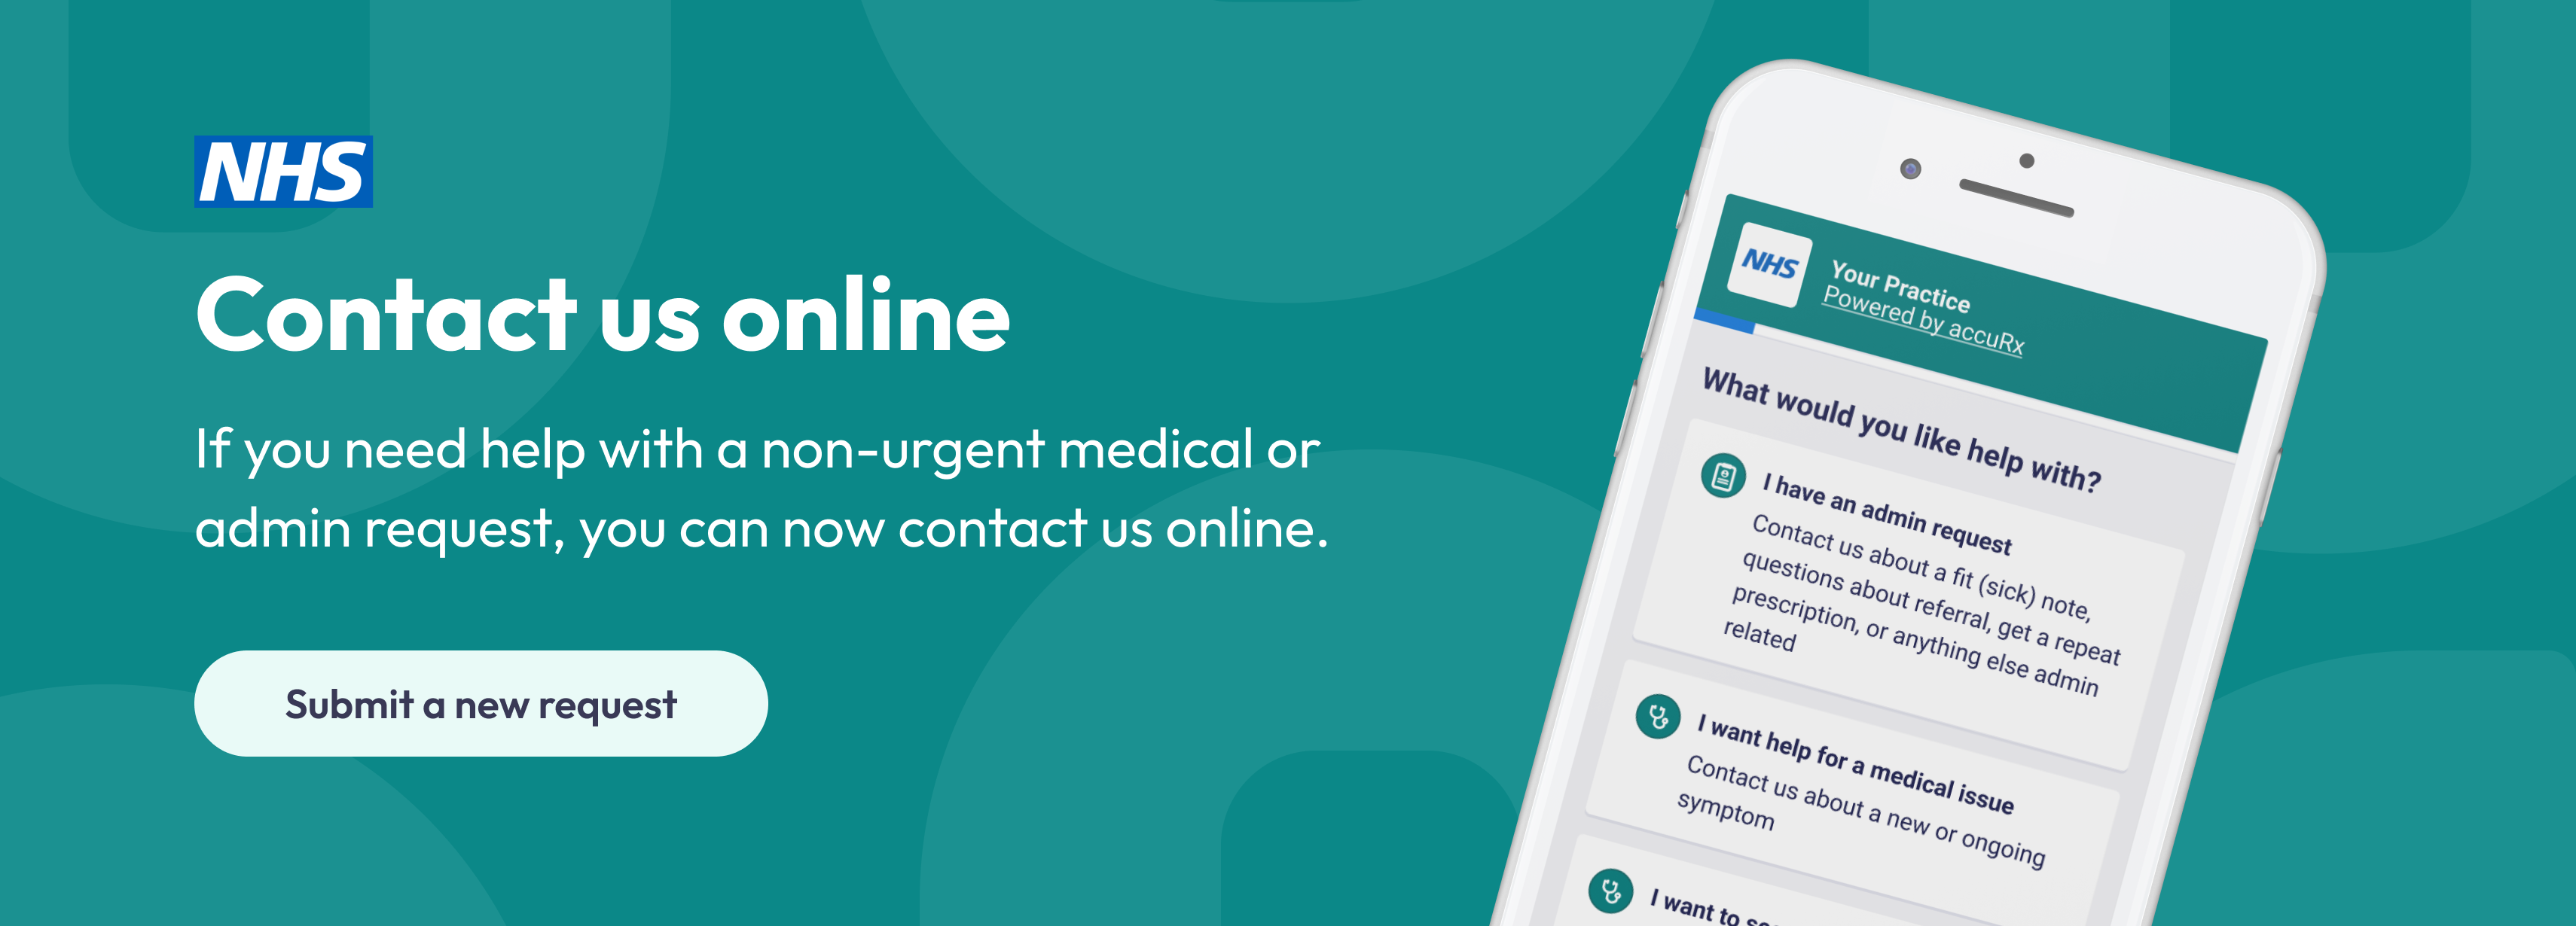 Contact us online. If you need help with a non-urgent medical or admin request